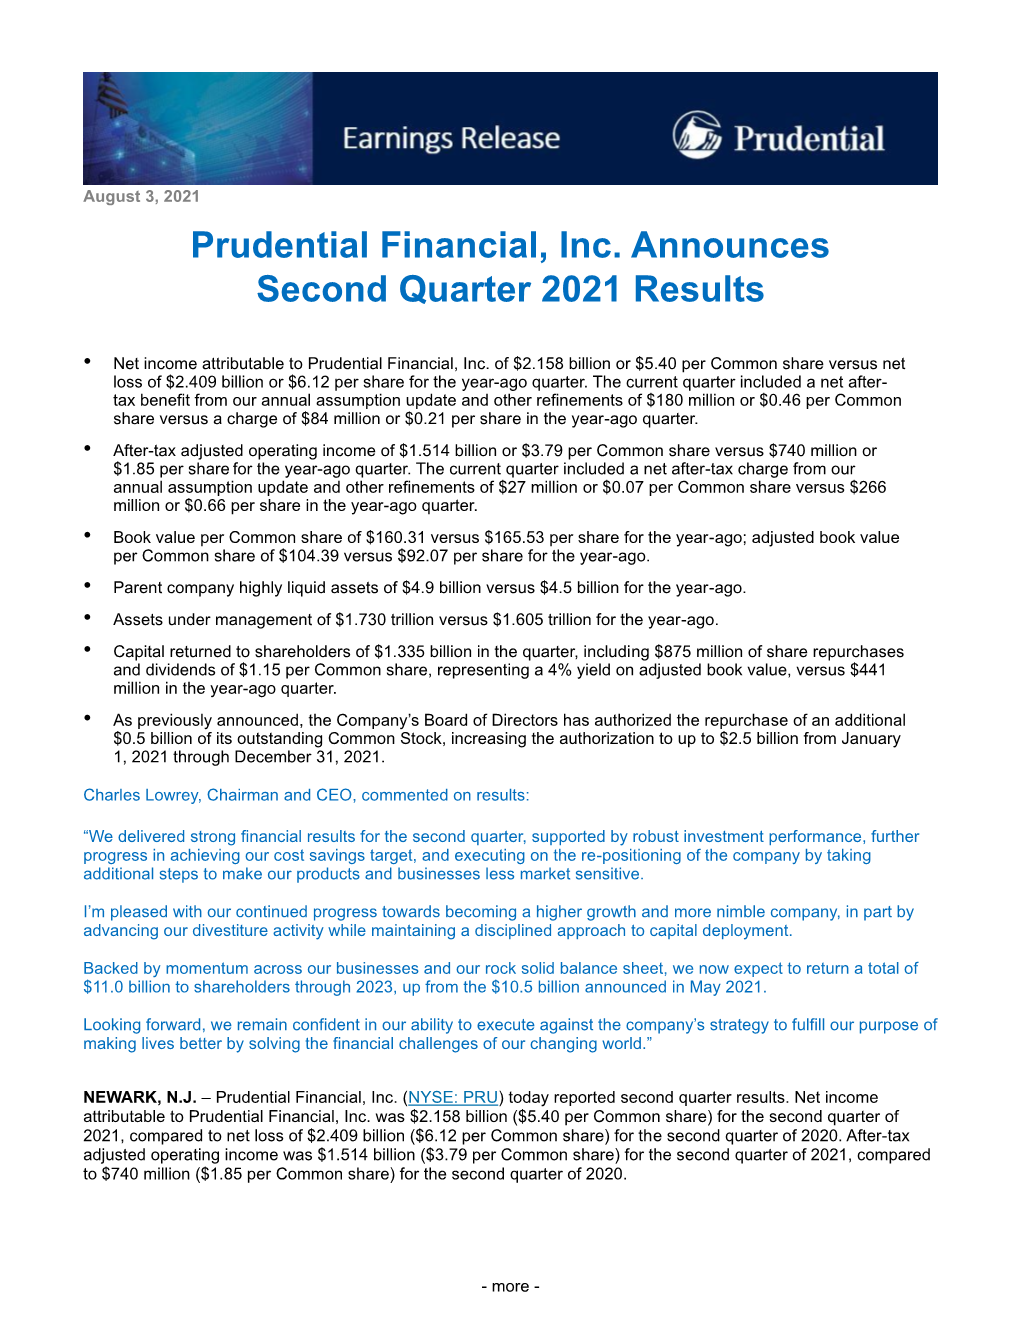 Prudential Financial, Inc. Announces Second Quarter 2021 Results